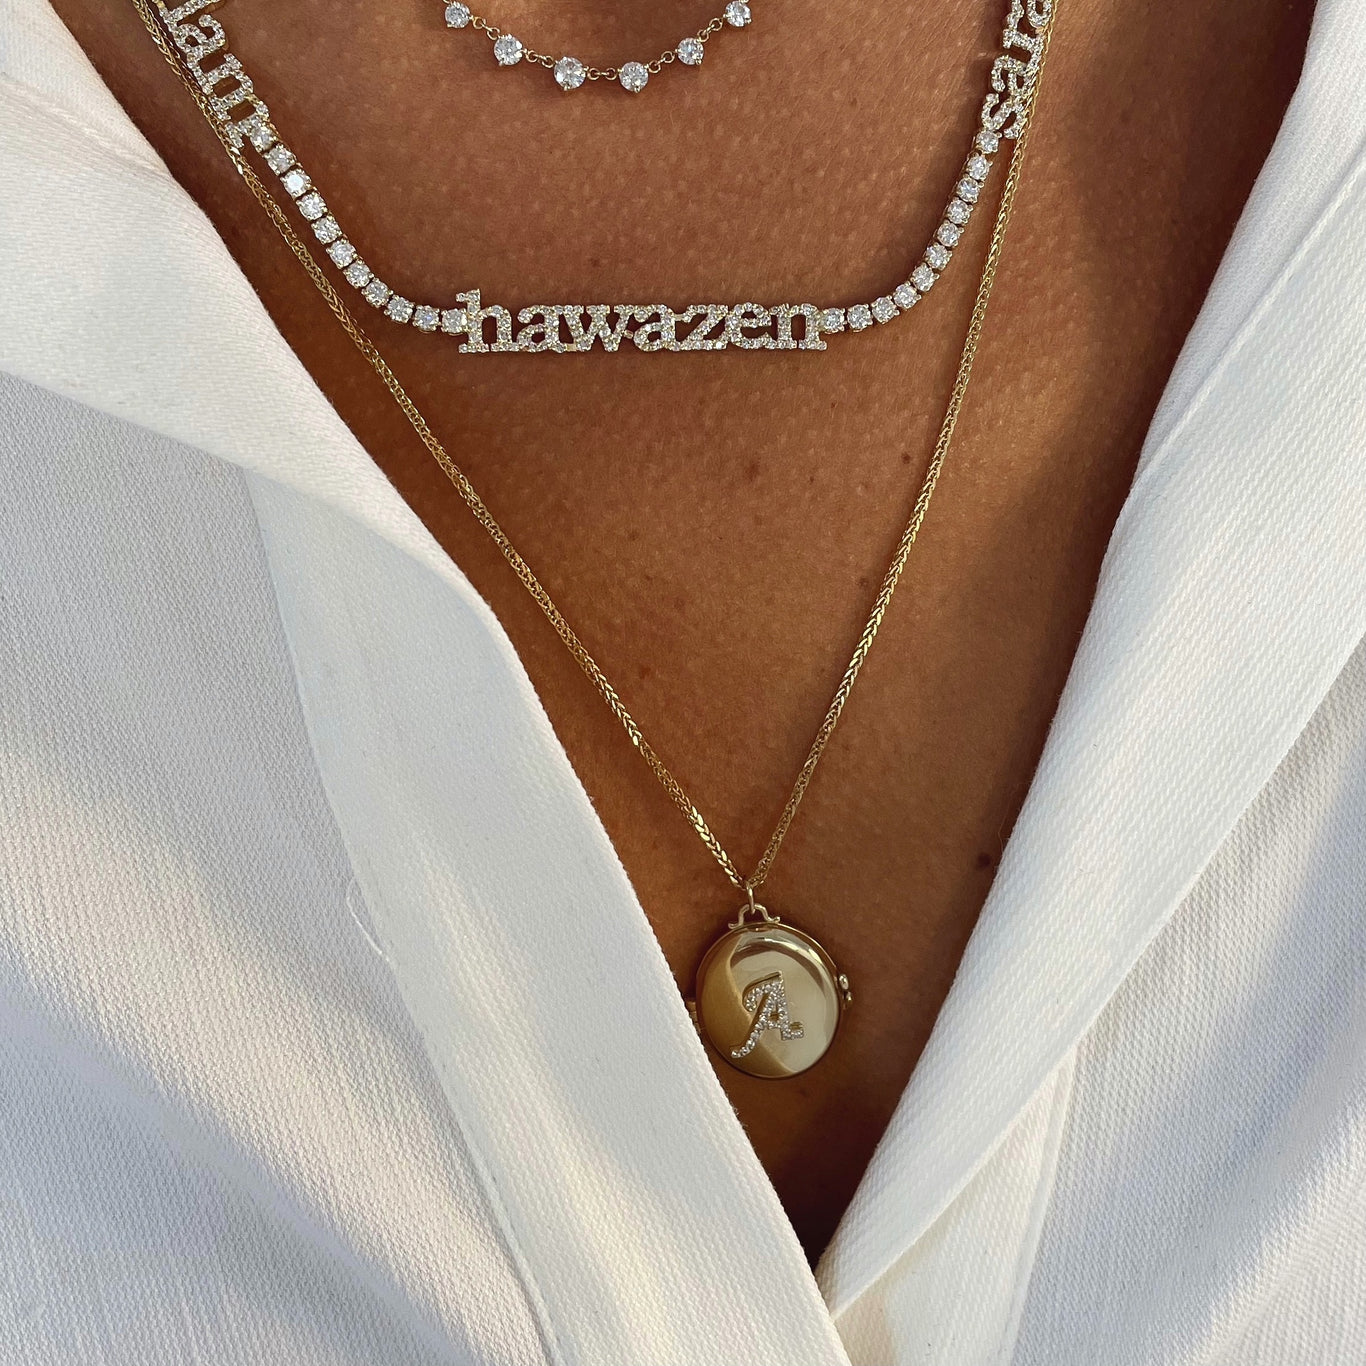 Initial locket necklace shown in letter A